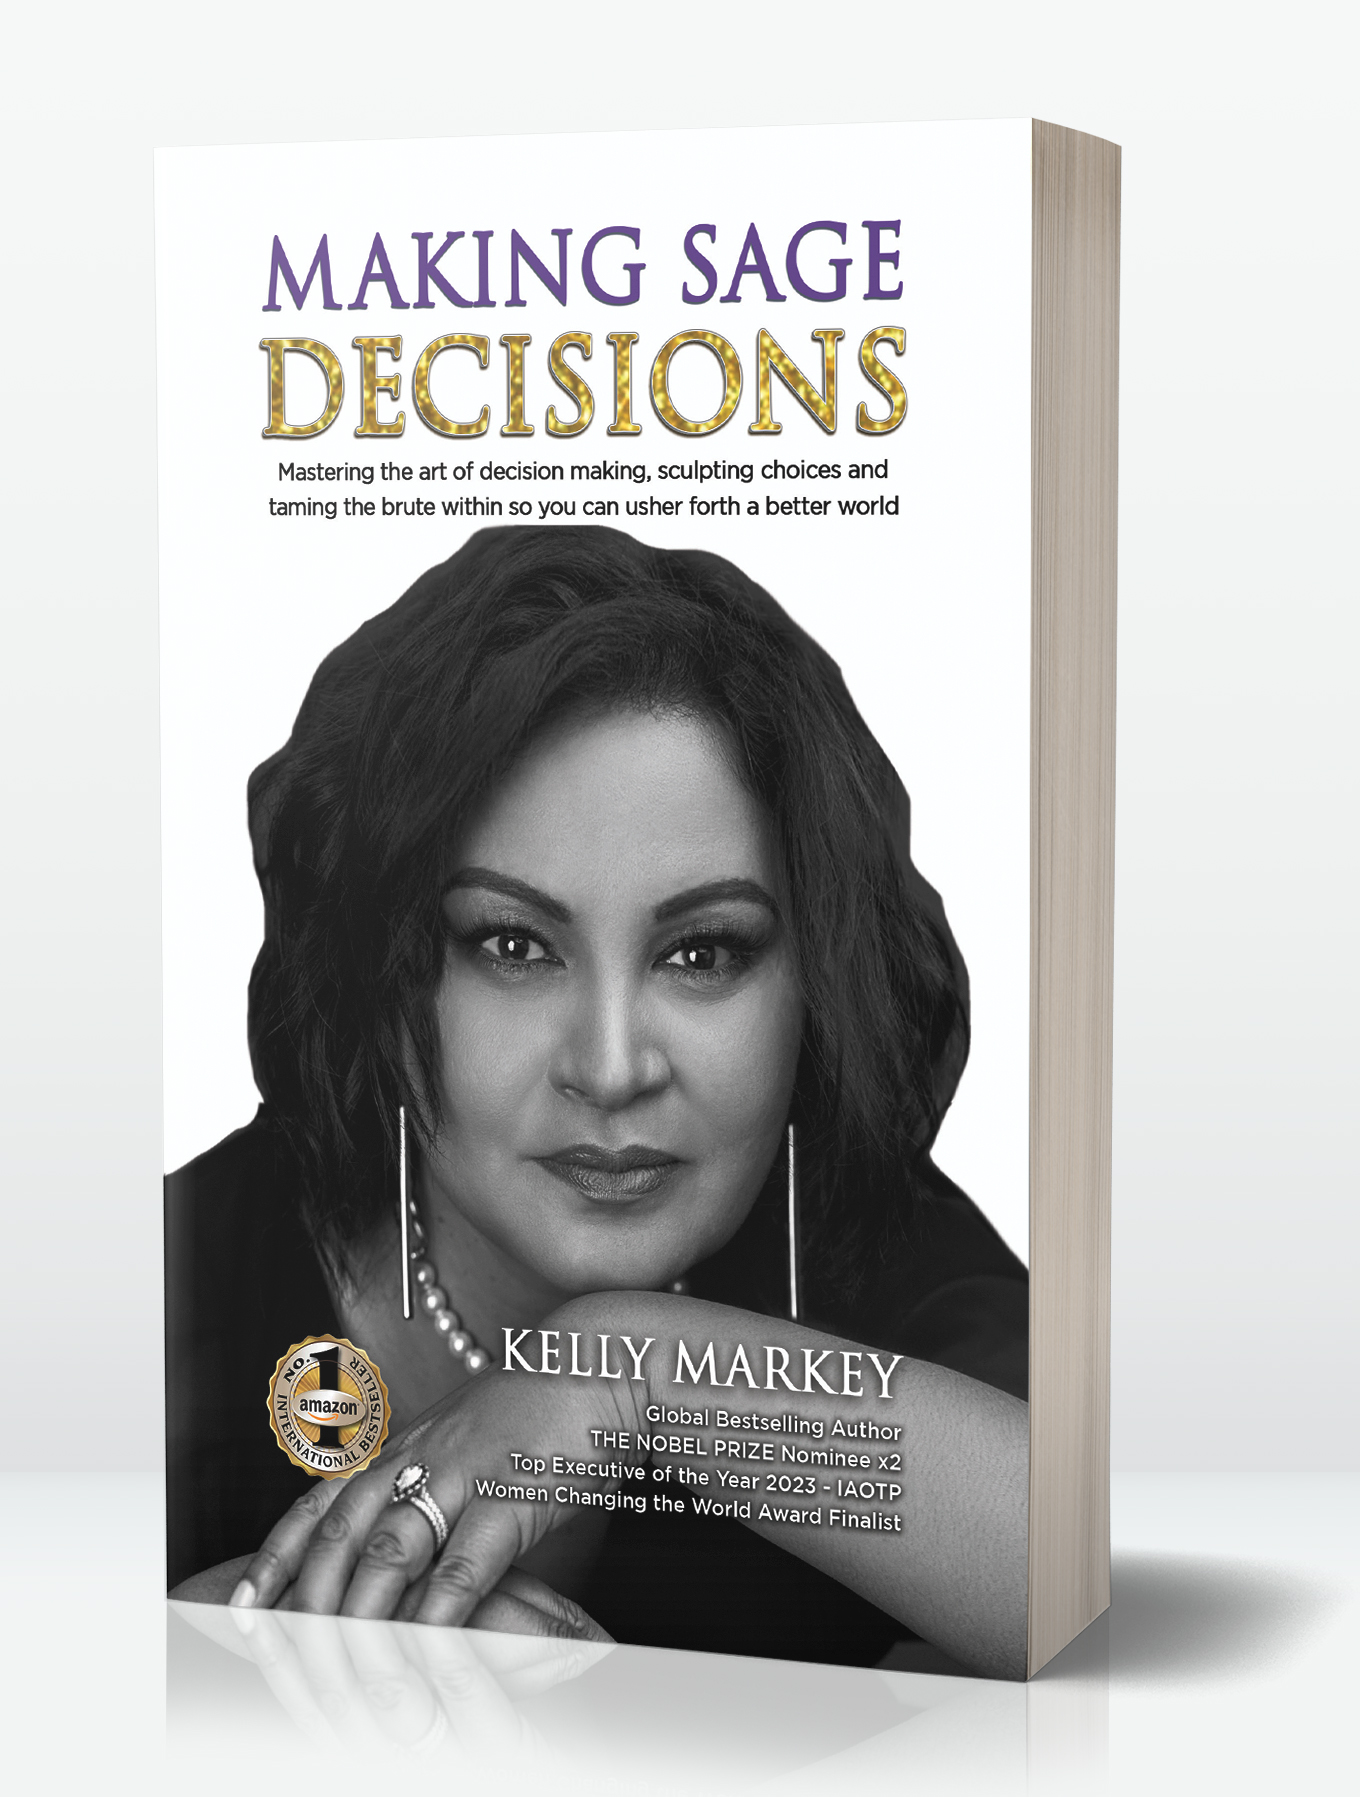 Bestselling Author Kelly Markey Unveils Groundbreaking Book: "Making Sage Decisions"